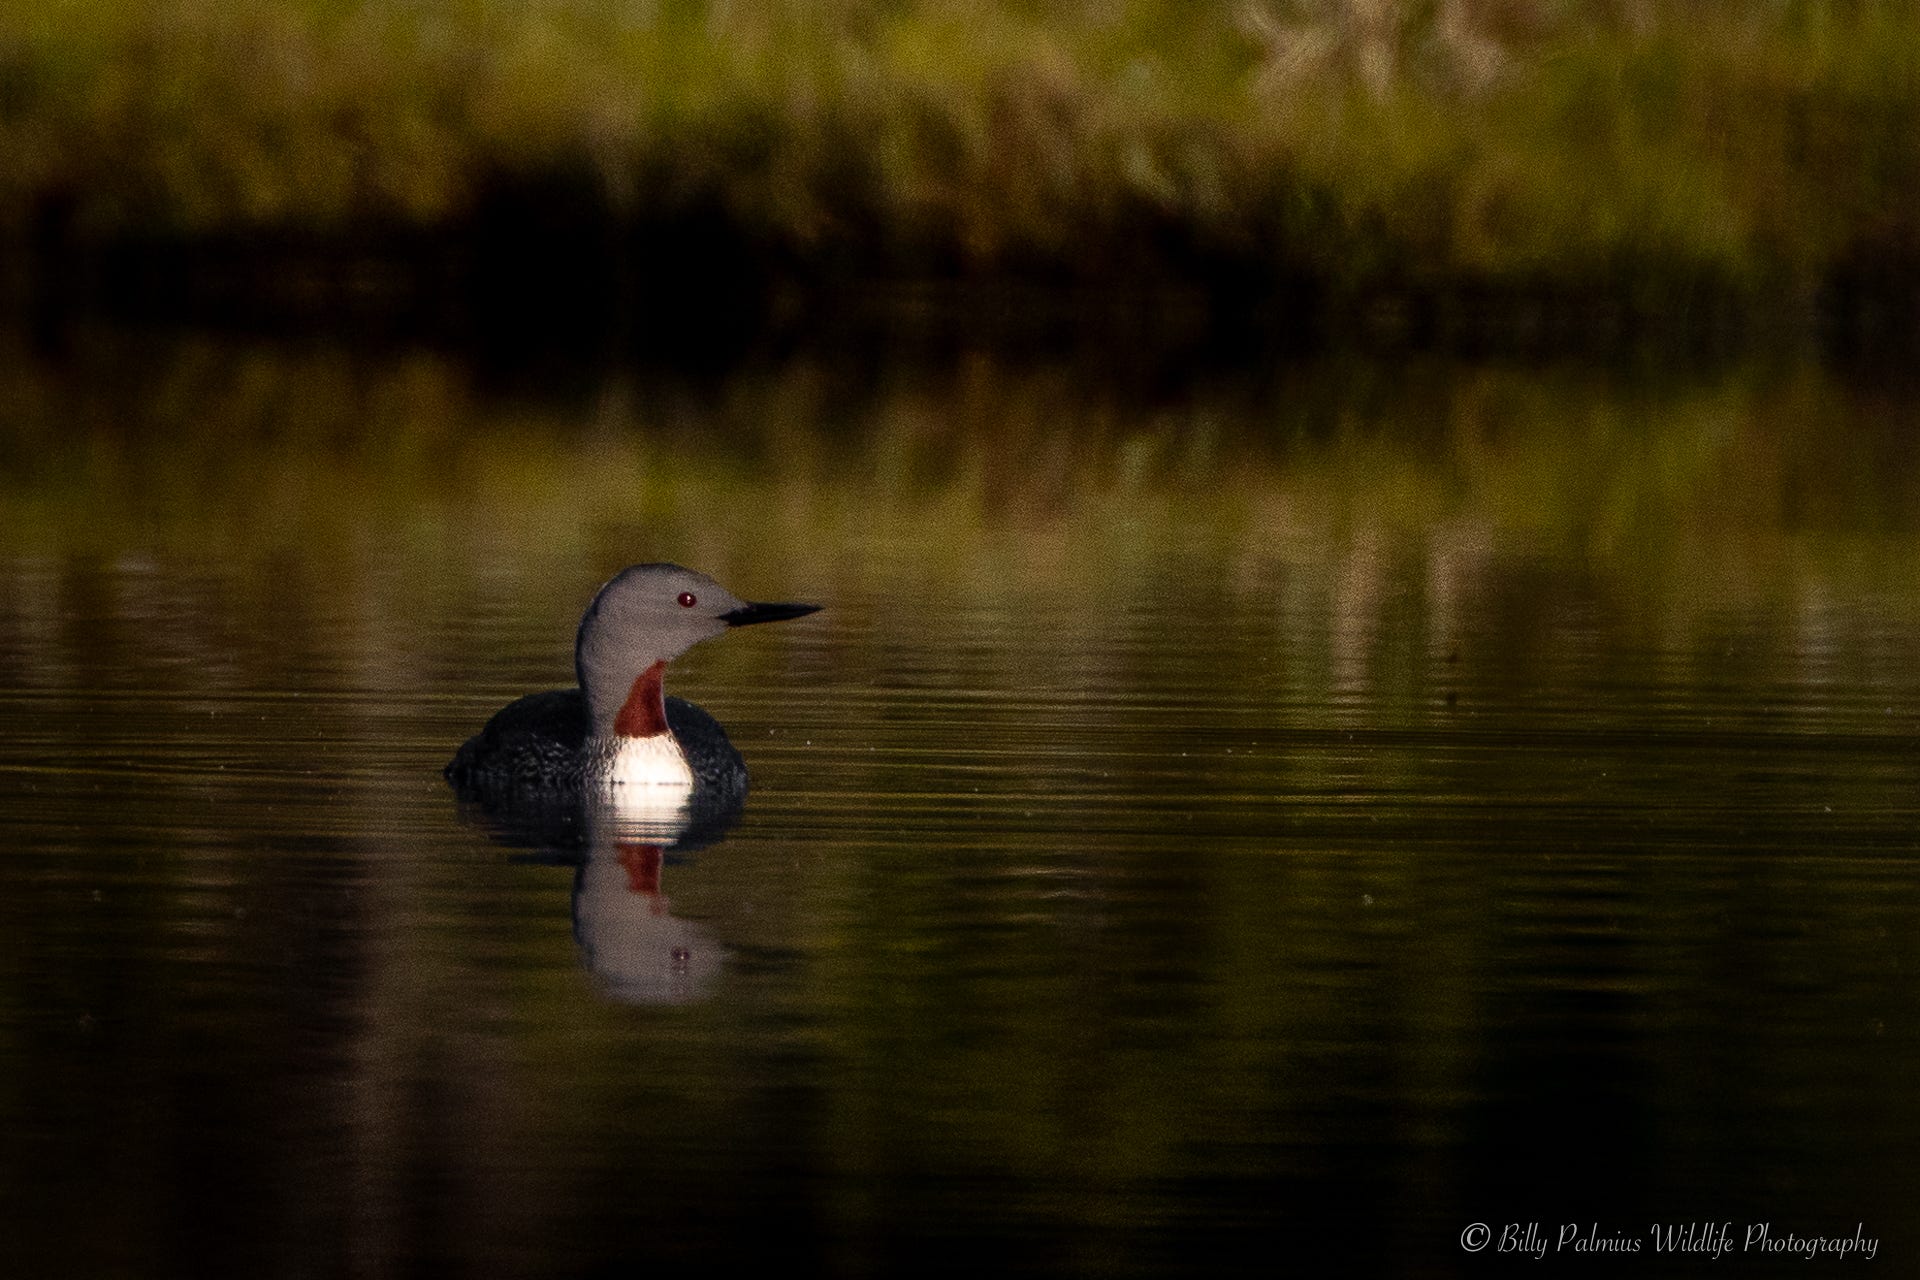 Pictures of the Red-throated divers during their breathing season